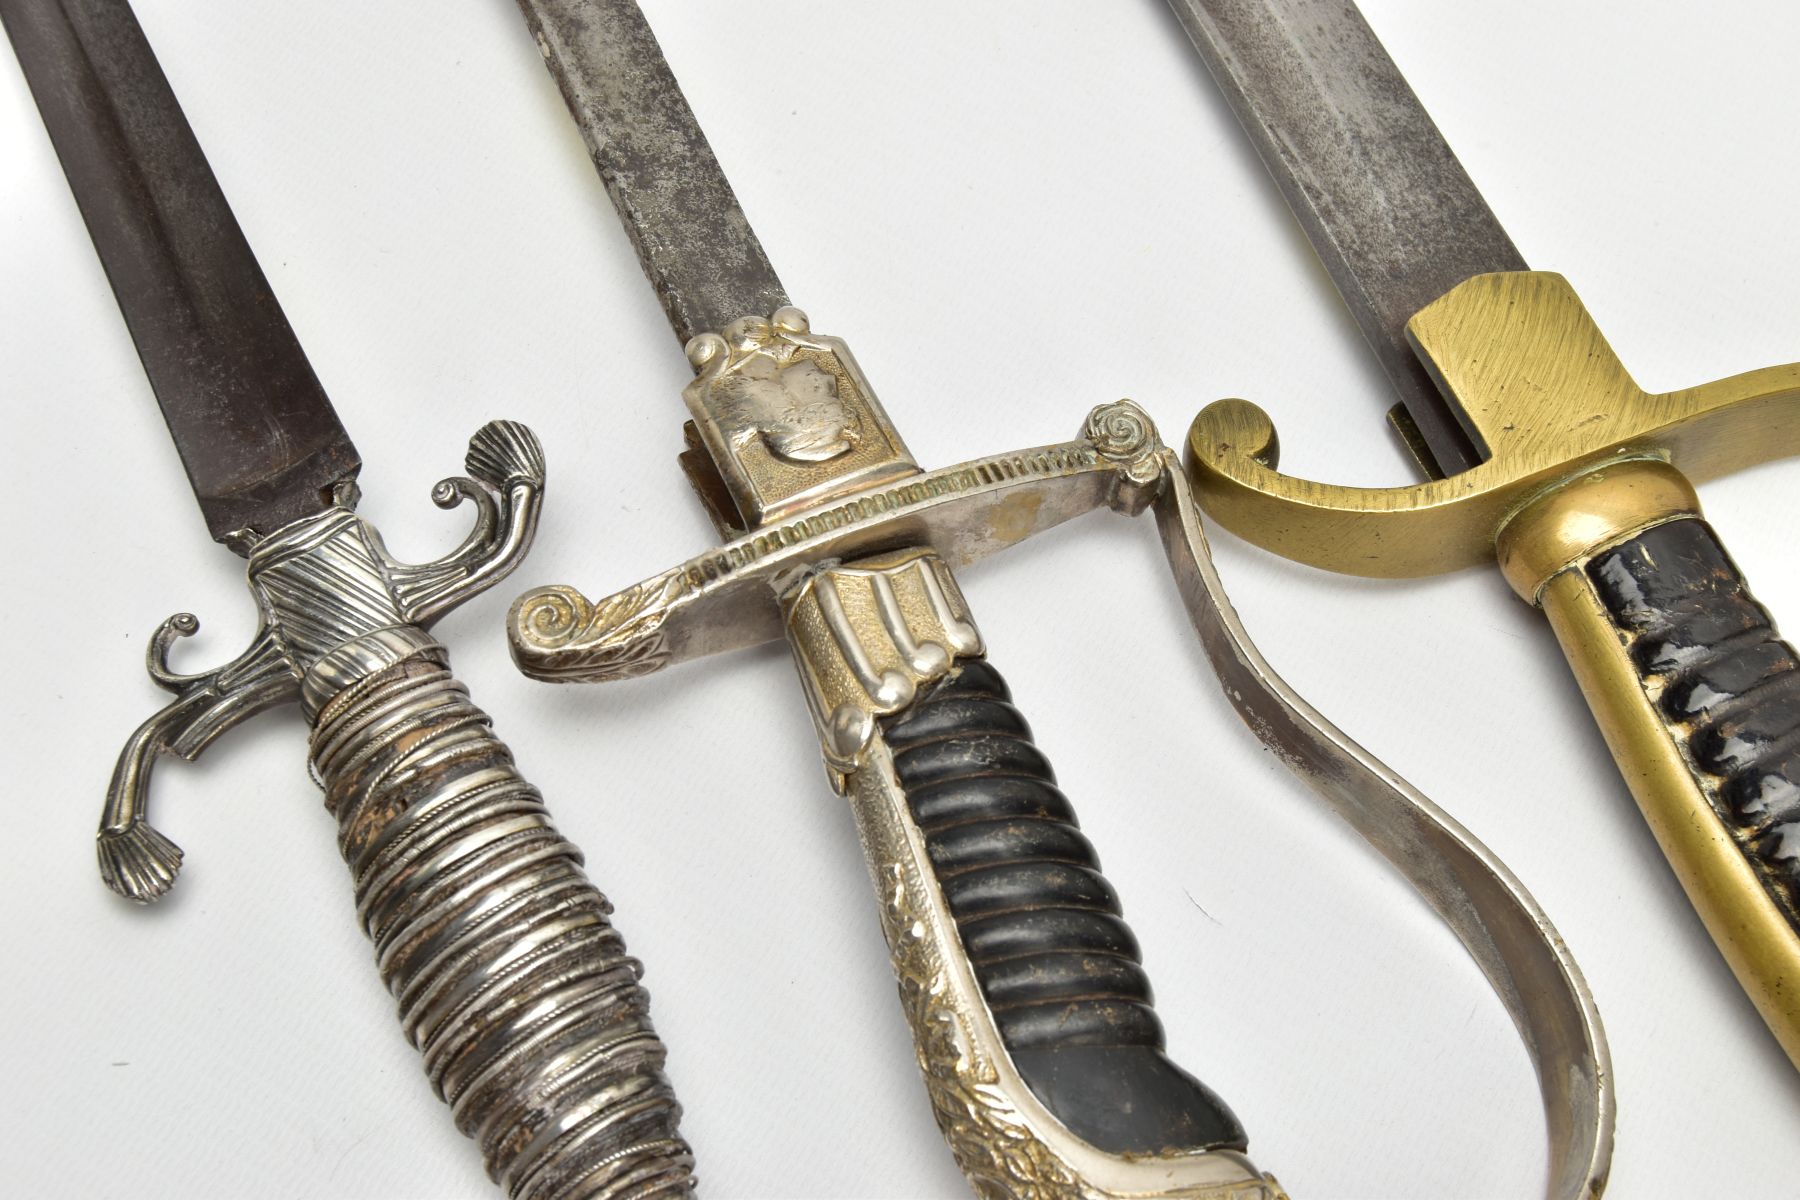 THREE SWORDS BELIEVED 19TH Century, a white metal ornate grip and cross guard blade tip broken, - Image 7 of 12